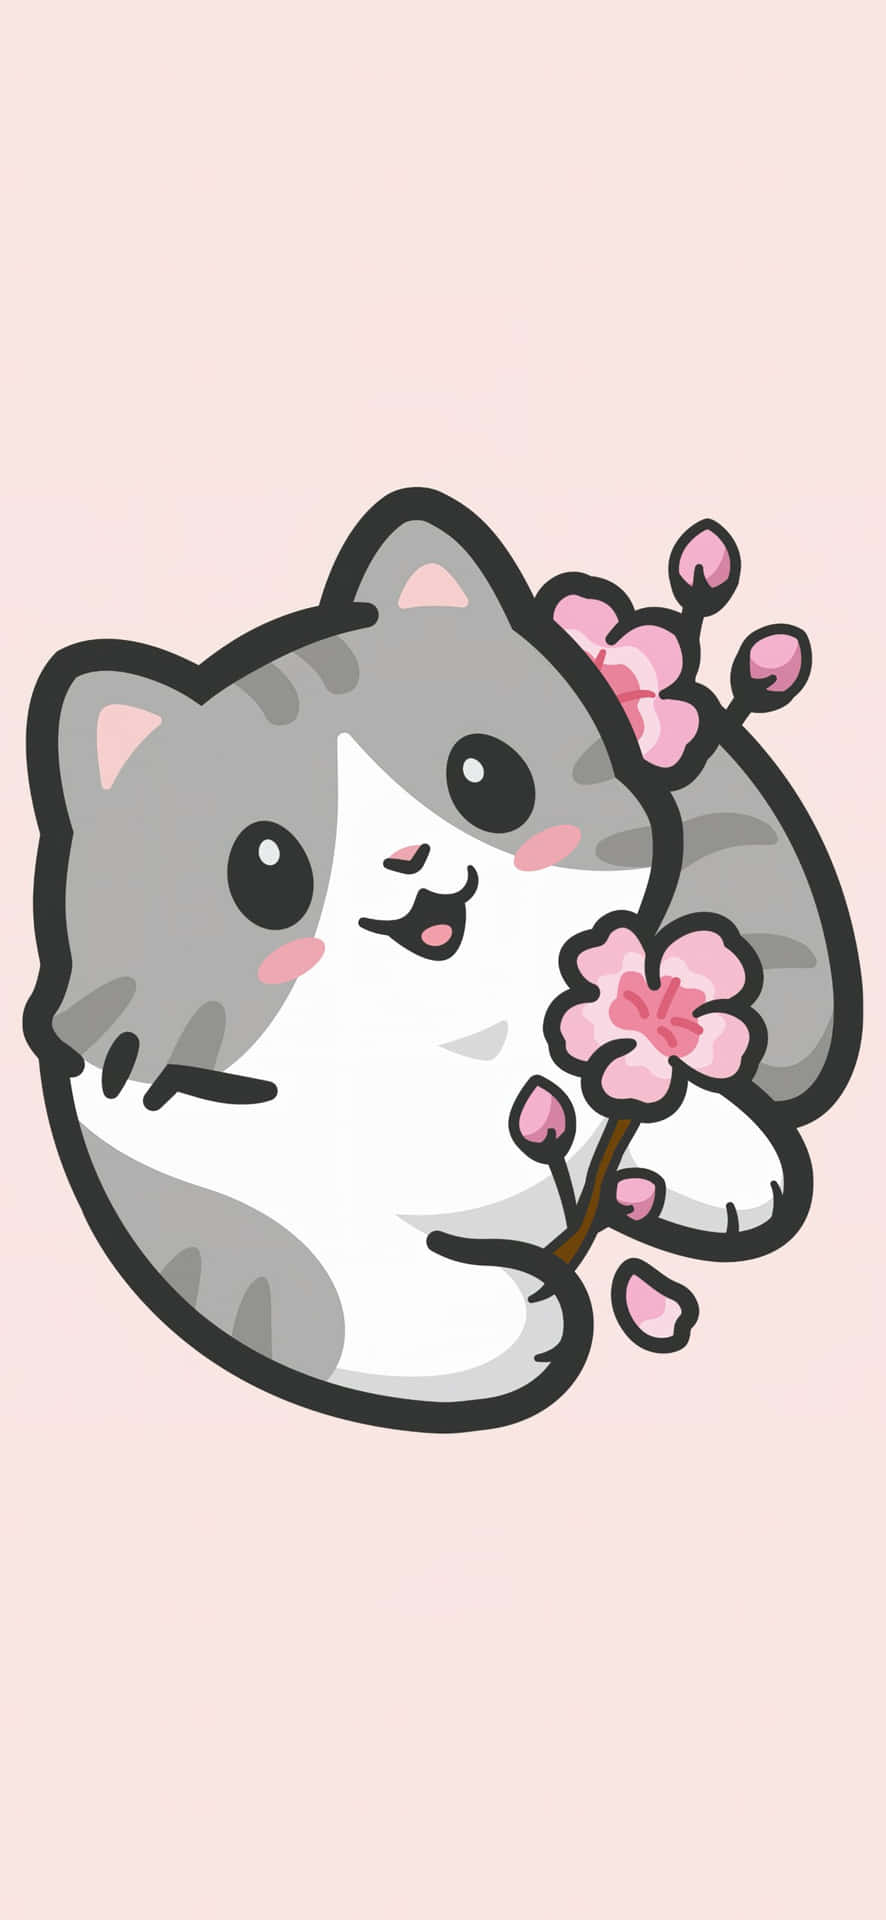 Cute Cartoon Catwith Cherry Blossoms Wallpaper